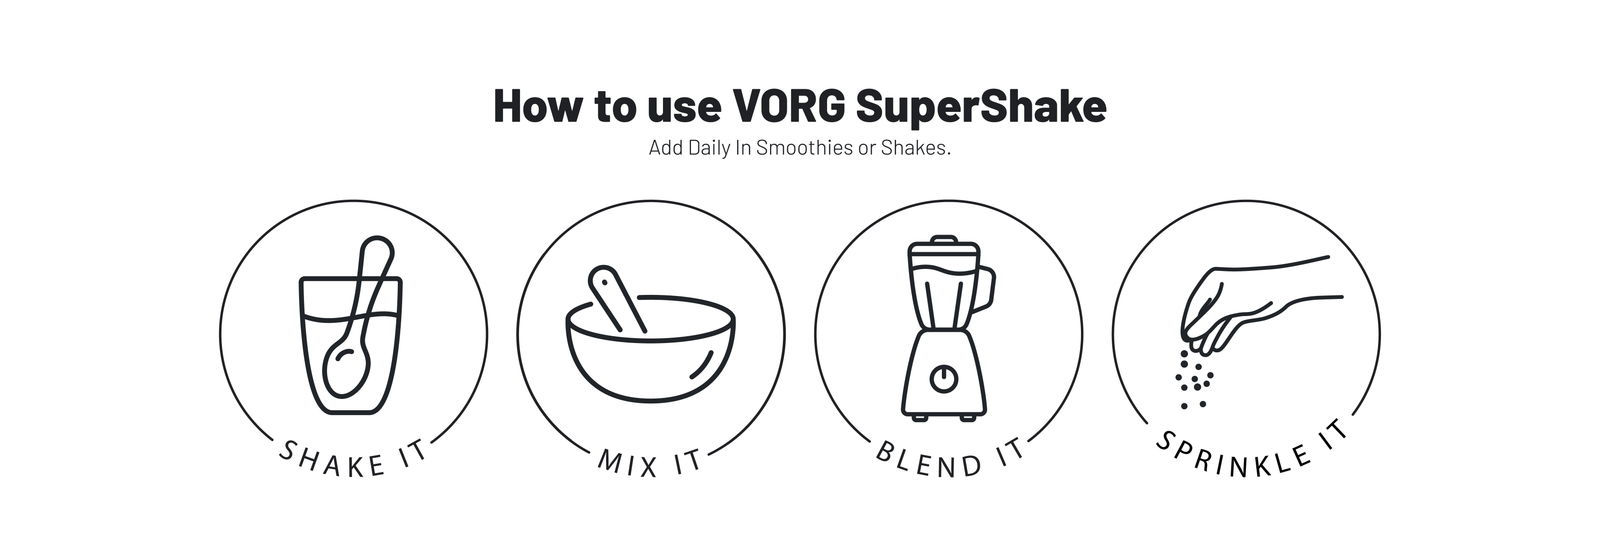 VORG How to use logos